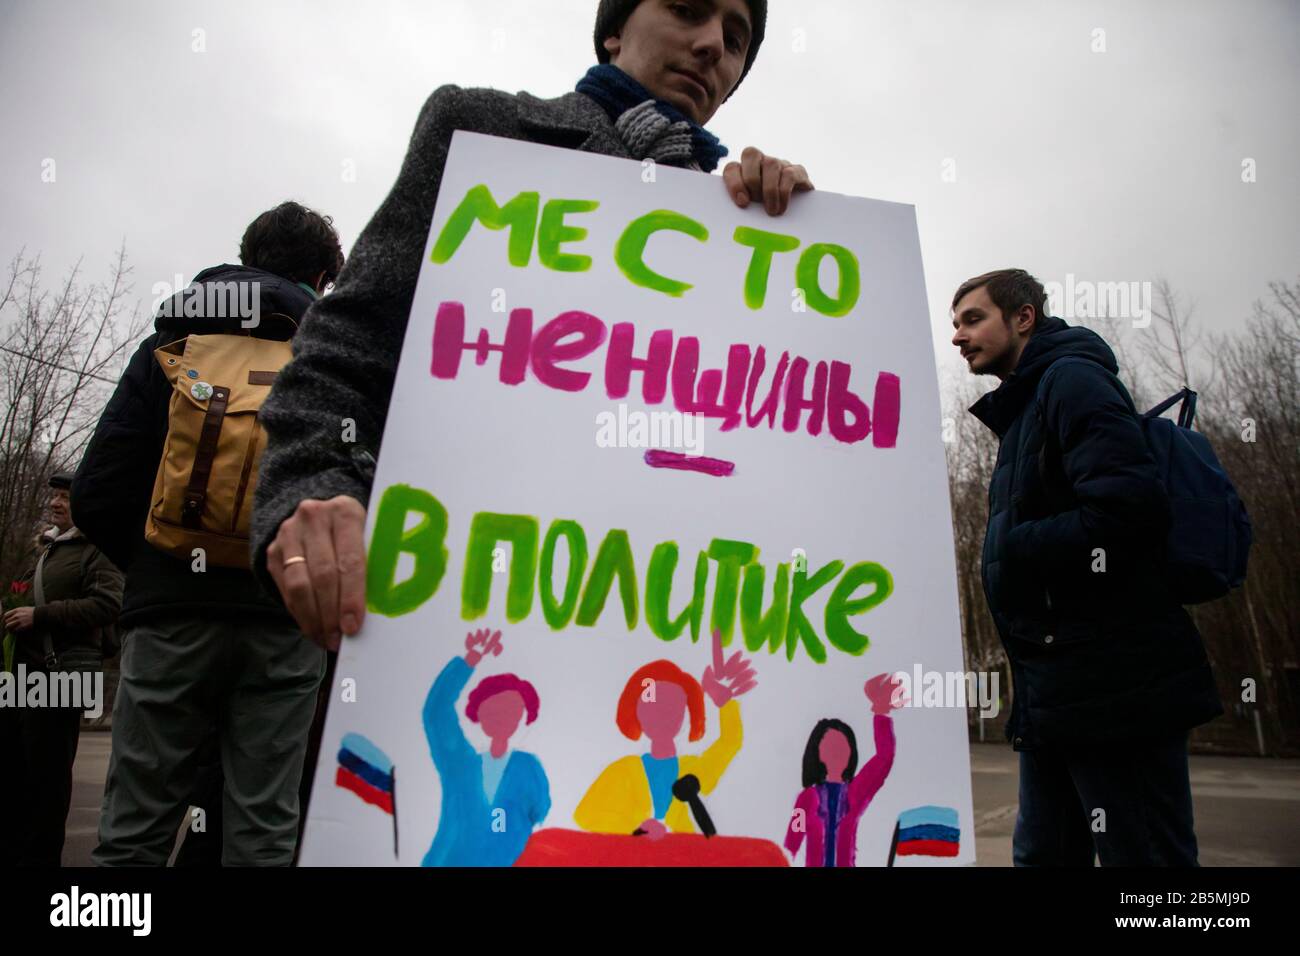 Moscow, Russia. 8th of March, 2020 A participant in a rally 'March 8 - celebrate the holiday correctly' for women's solidarity and women's rights, organized by the group of female activists to mark International Women's Day in Moscow's Sokolniki Hyde Park.The protesters stand out for a draft law protecting women from domestic violence, for equality, against sexism, female objectification, and political repression. The banner reads 'A woman's place in politics' Stock Photo